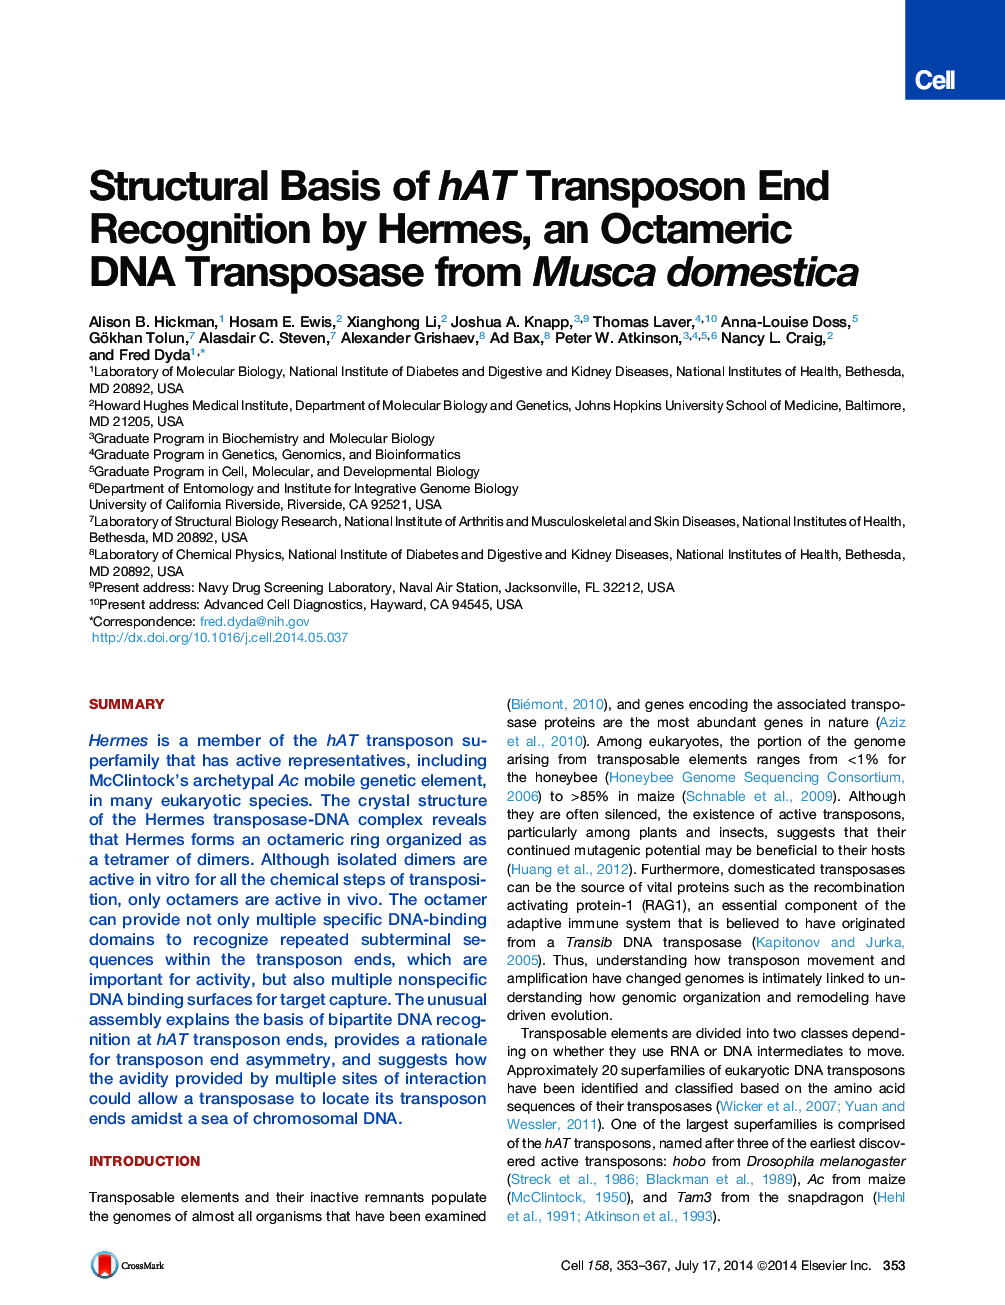 Structural Basis of hAT Transposon End Recognition by Hermes, an Octameric DNA Transposase from Musca domestica